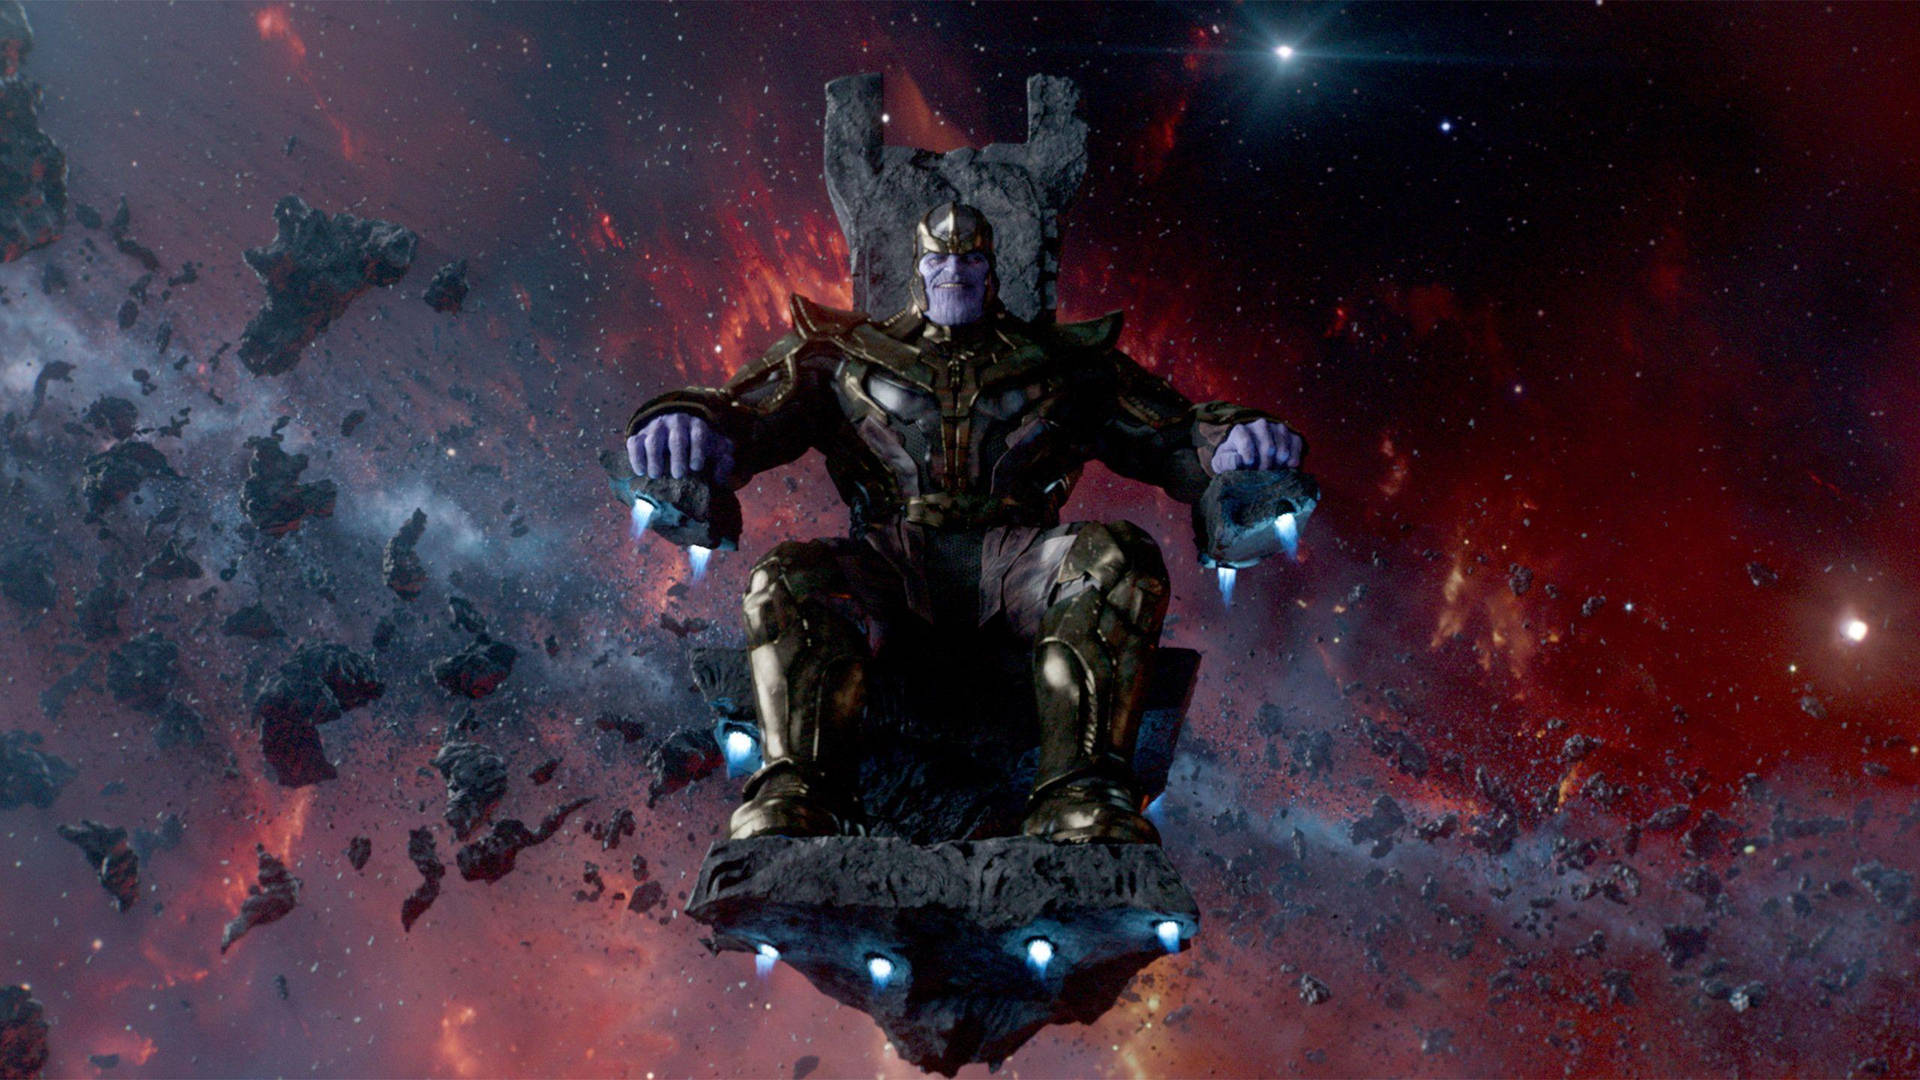 Free Thanos Wallpaper Downloads, [100+] Thanos Wallpapers for FREE |  